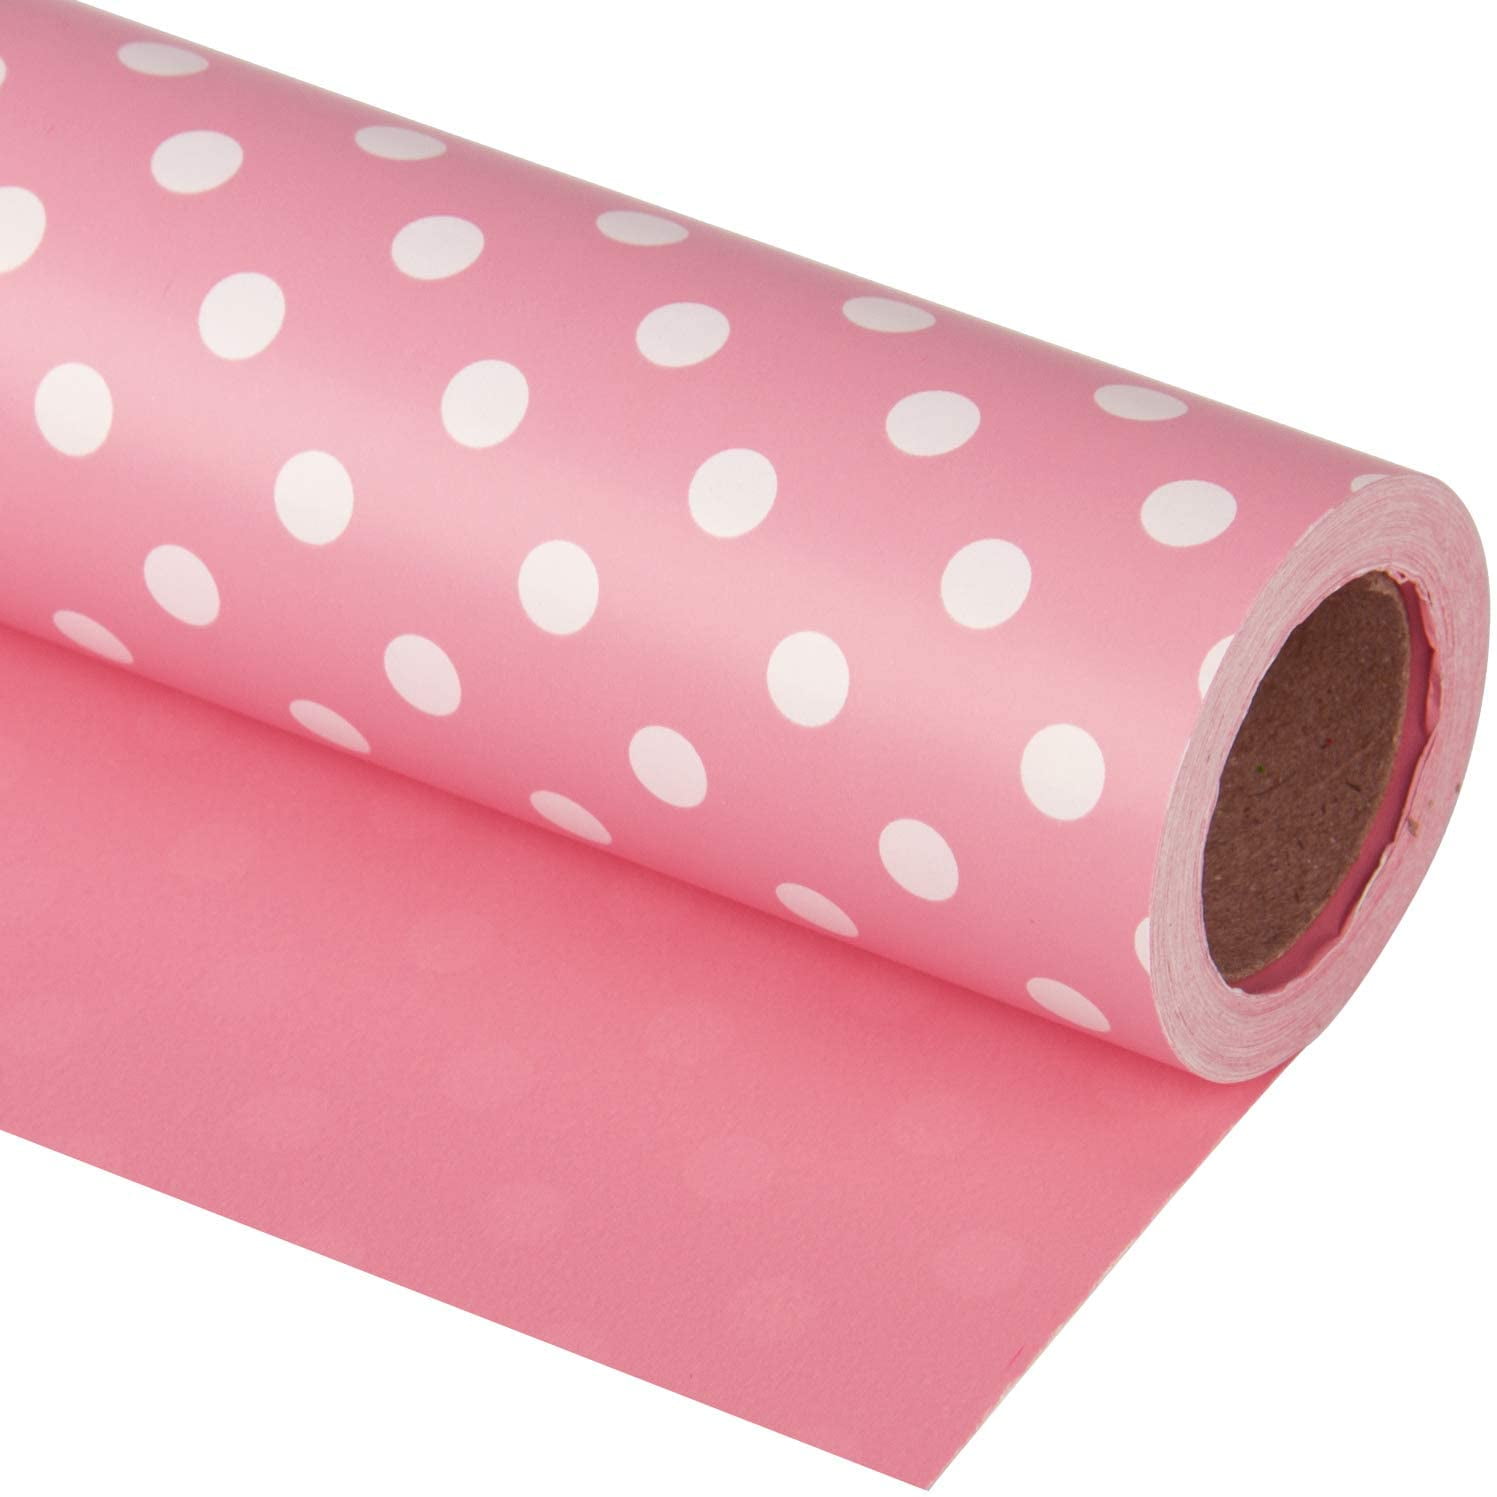 WRAPAHOLIC Reversible Wrapping Paper - Mini Roll - 17 Inch X 33 Feet - Pink  and Polka Dot Design for Birthday, Holiday, Wedding, Baby Shower 